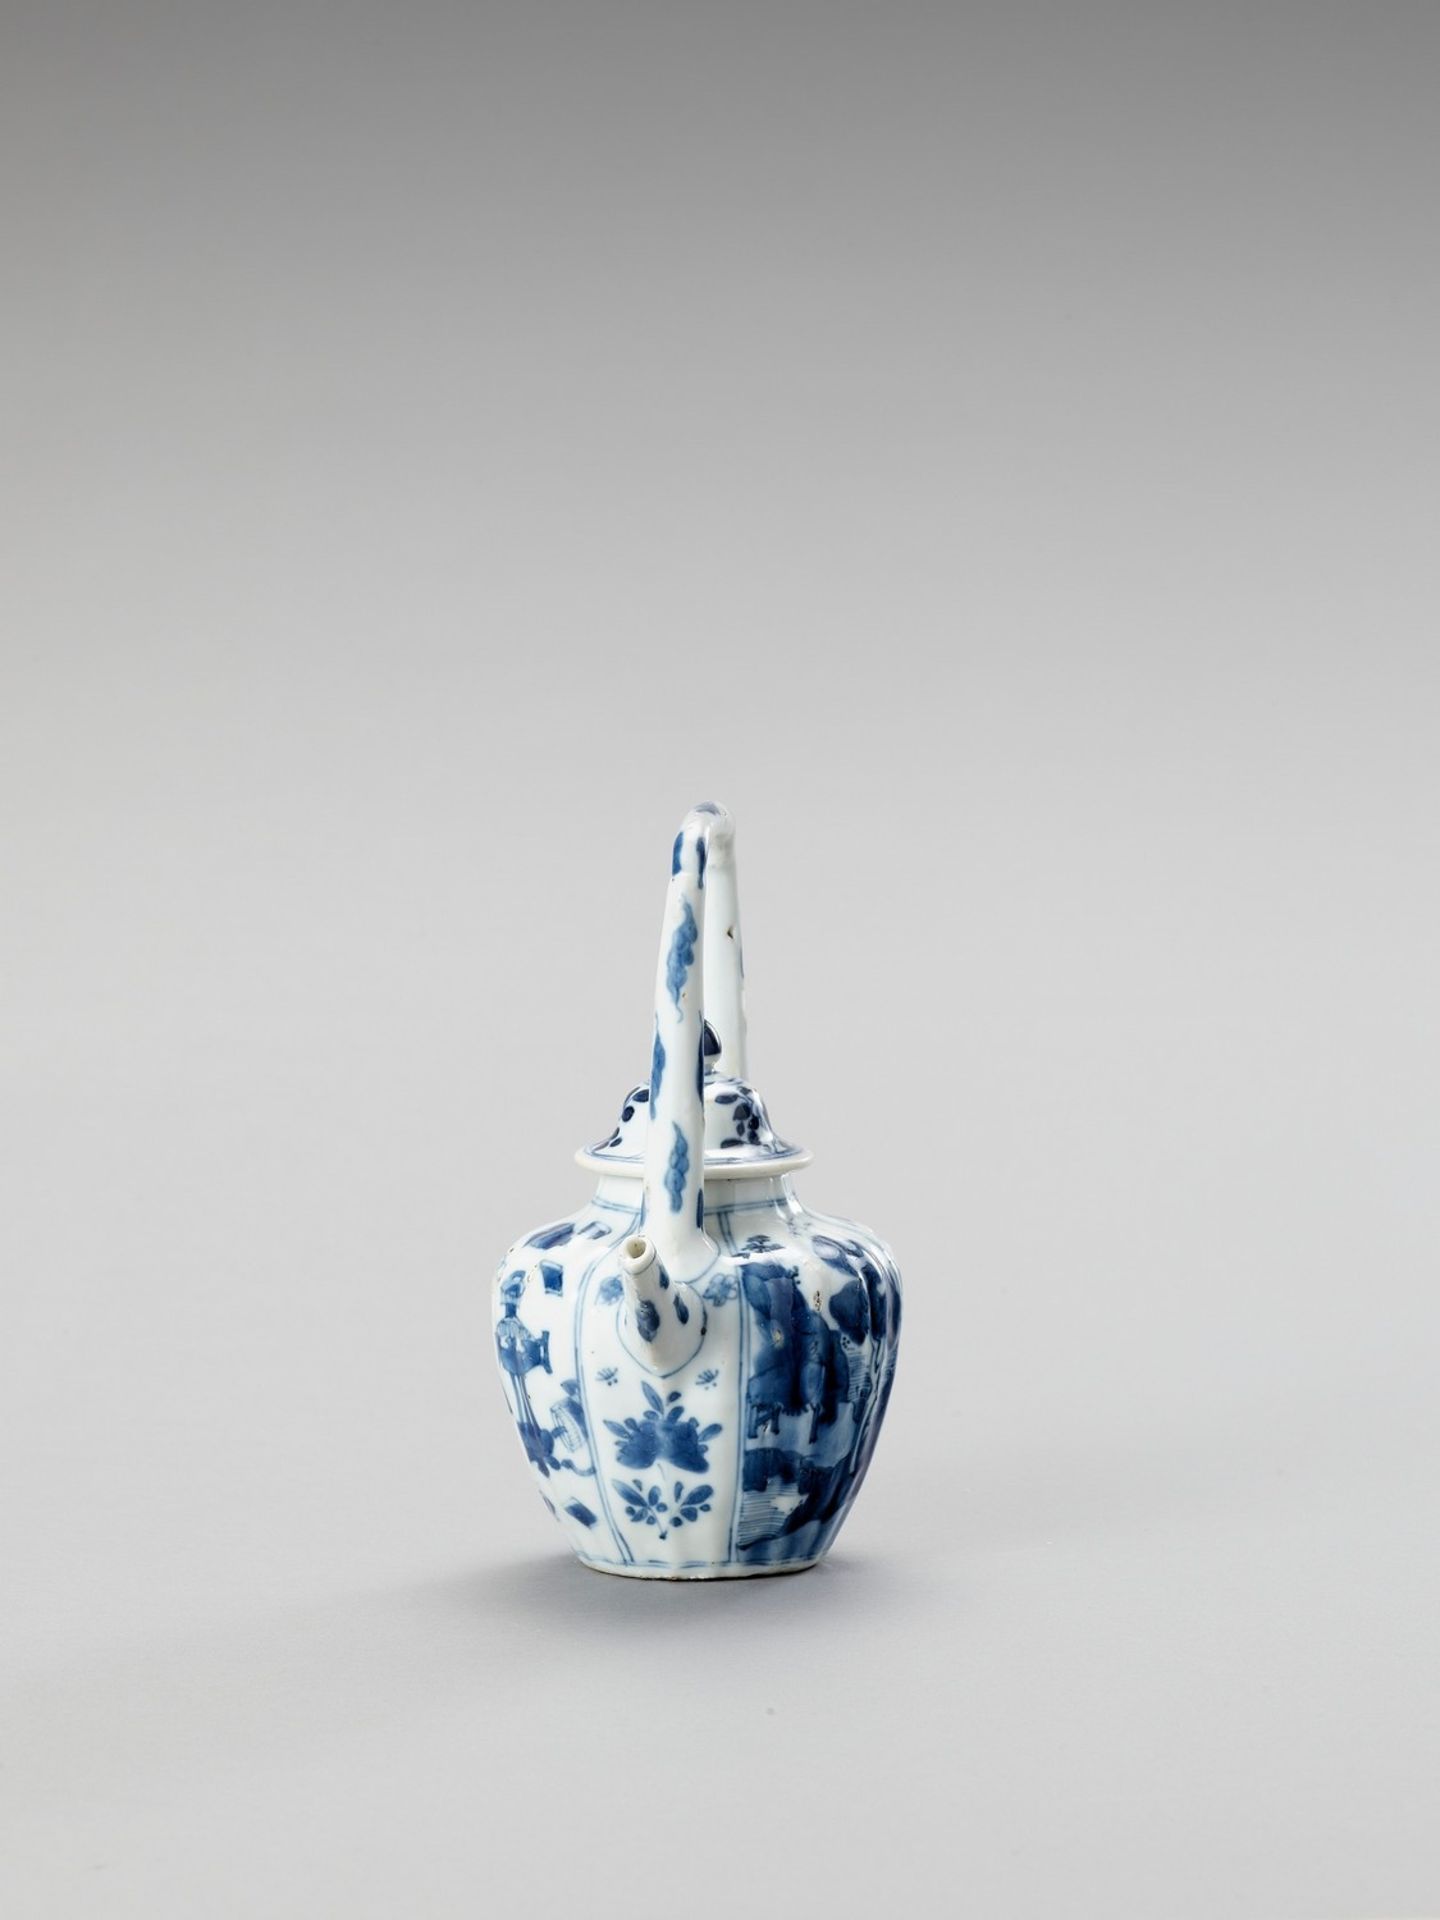 A BLUE AND WHITE PORCELAIN TEAPOT - Image 4 of 6